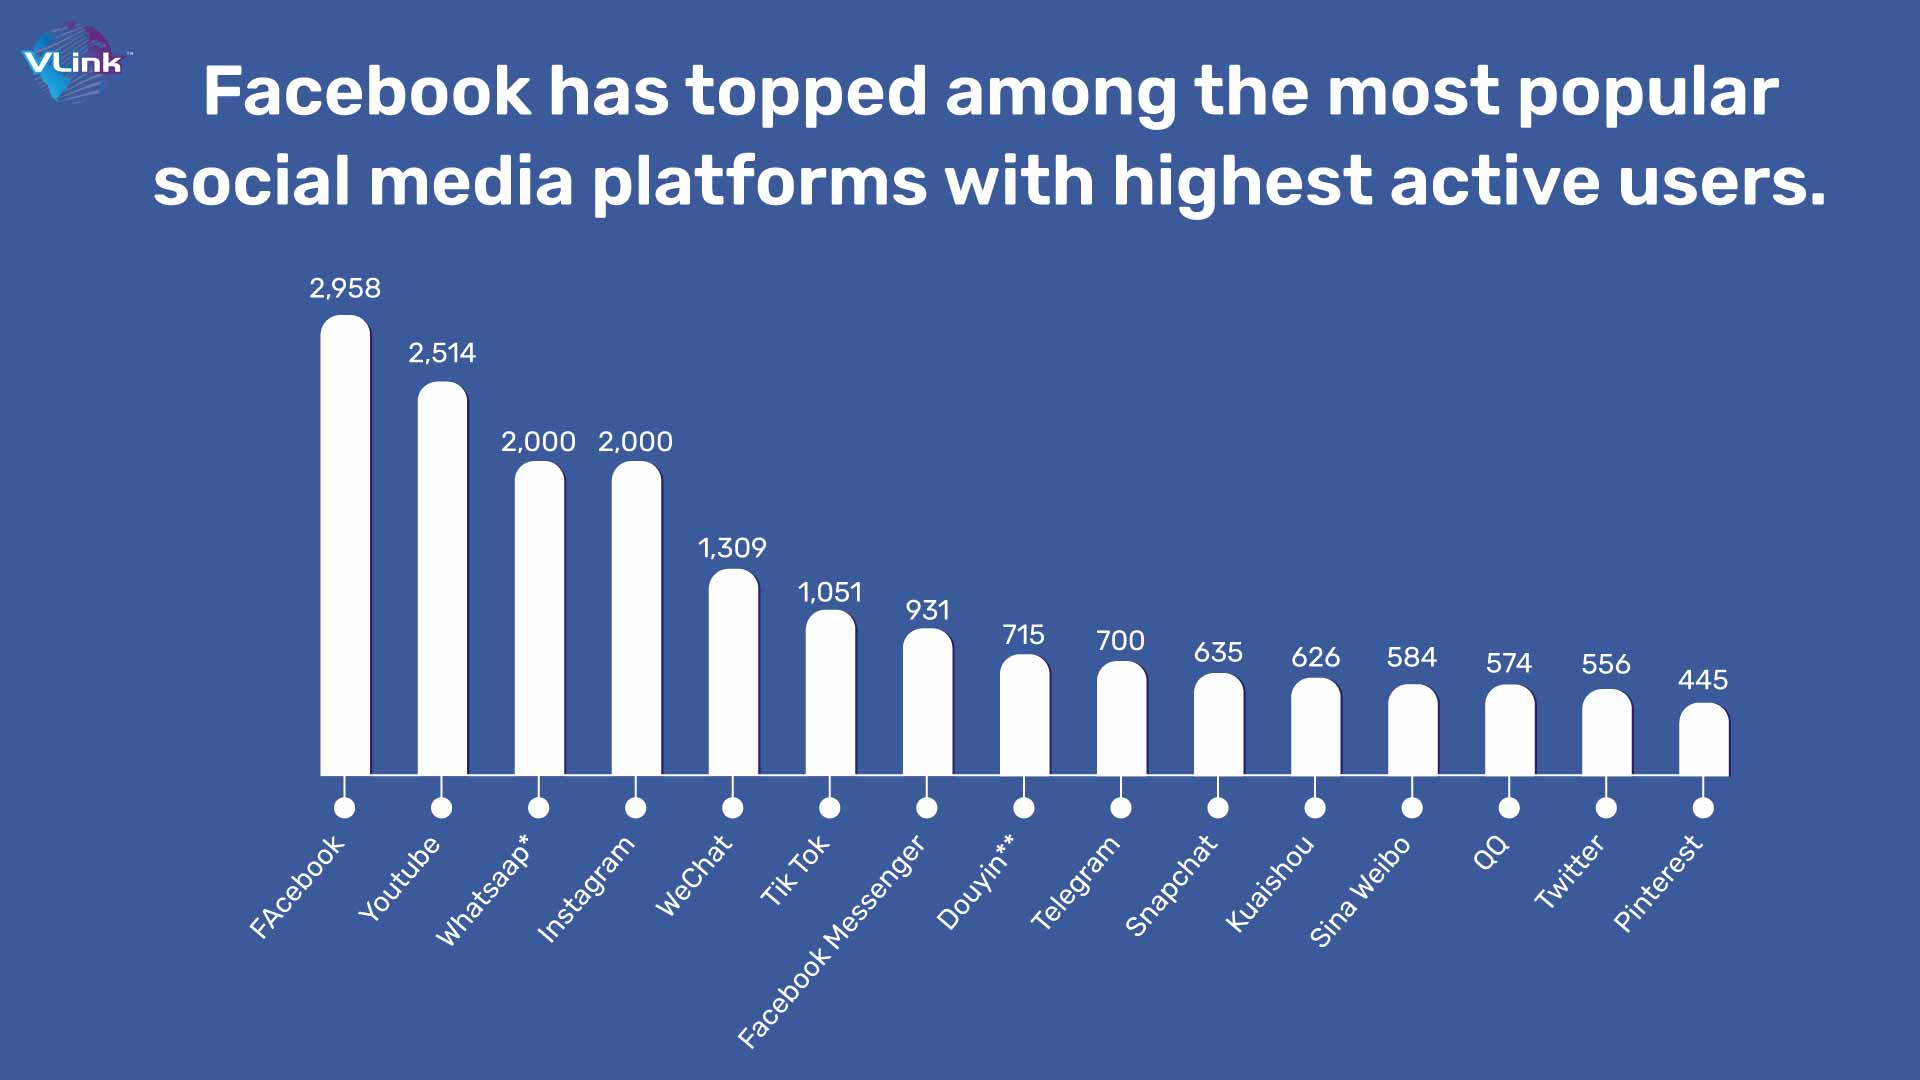 Facebook has topped among the most popular social media platforms with highest active users